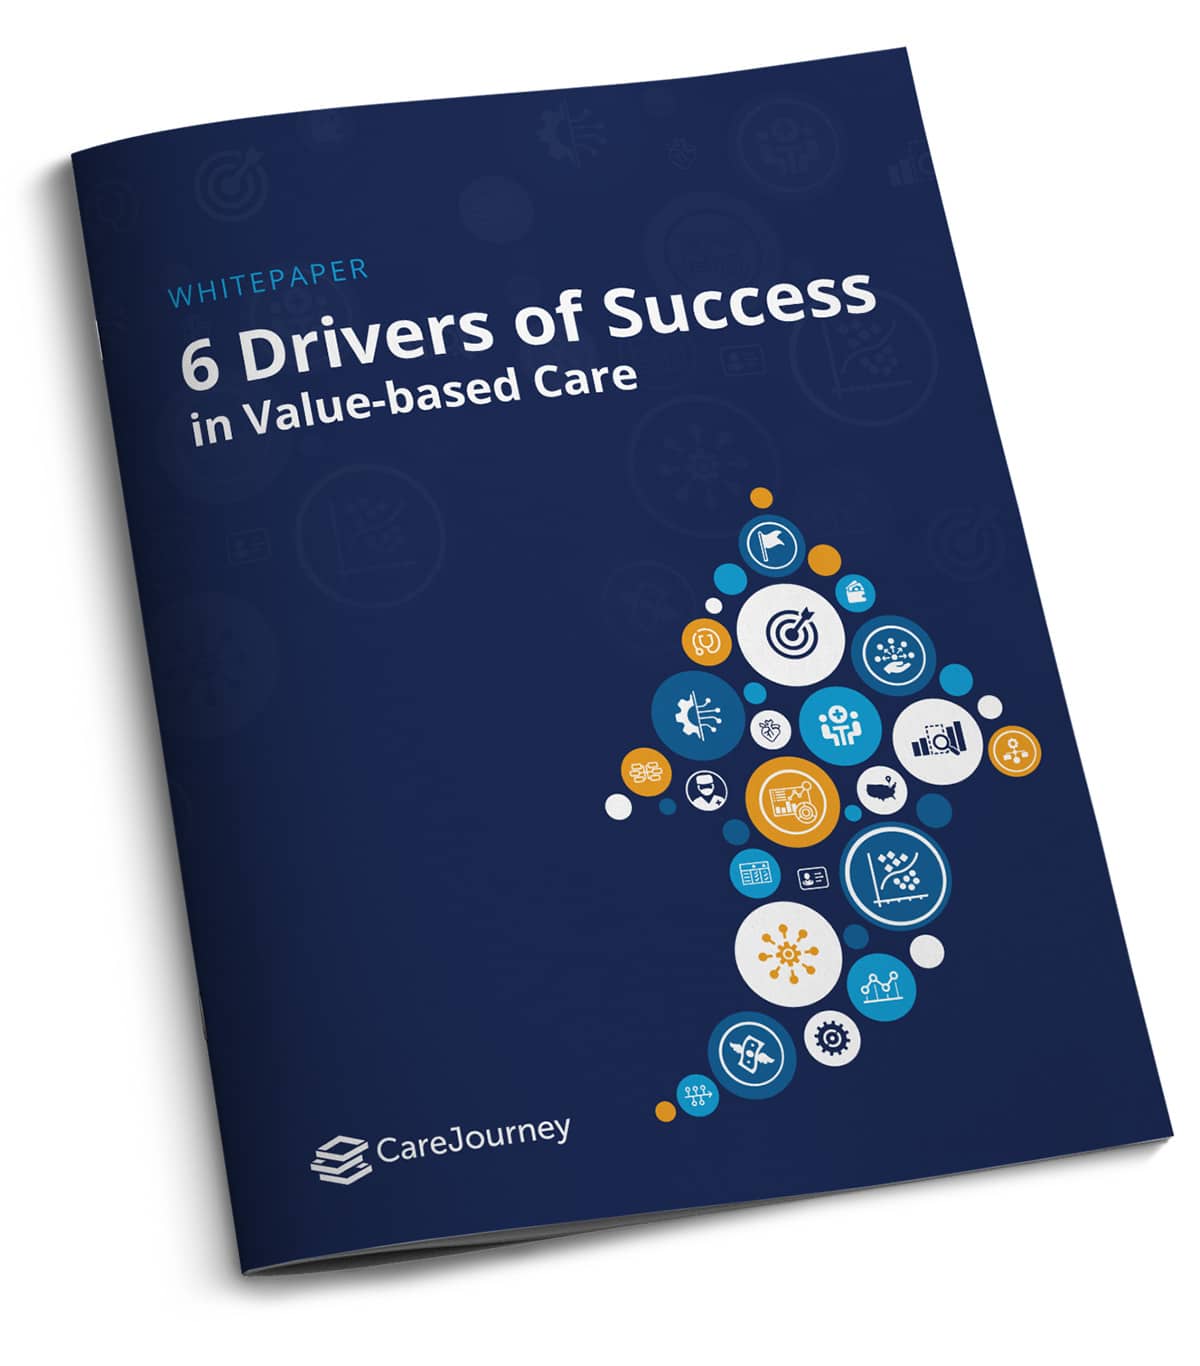 CareJourney Whitepaper: 6 Drivers of Success in Value-based Care